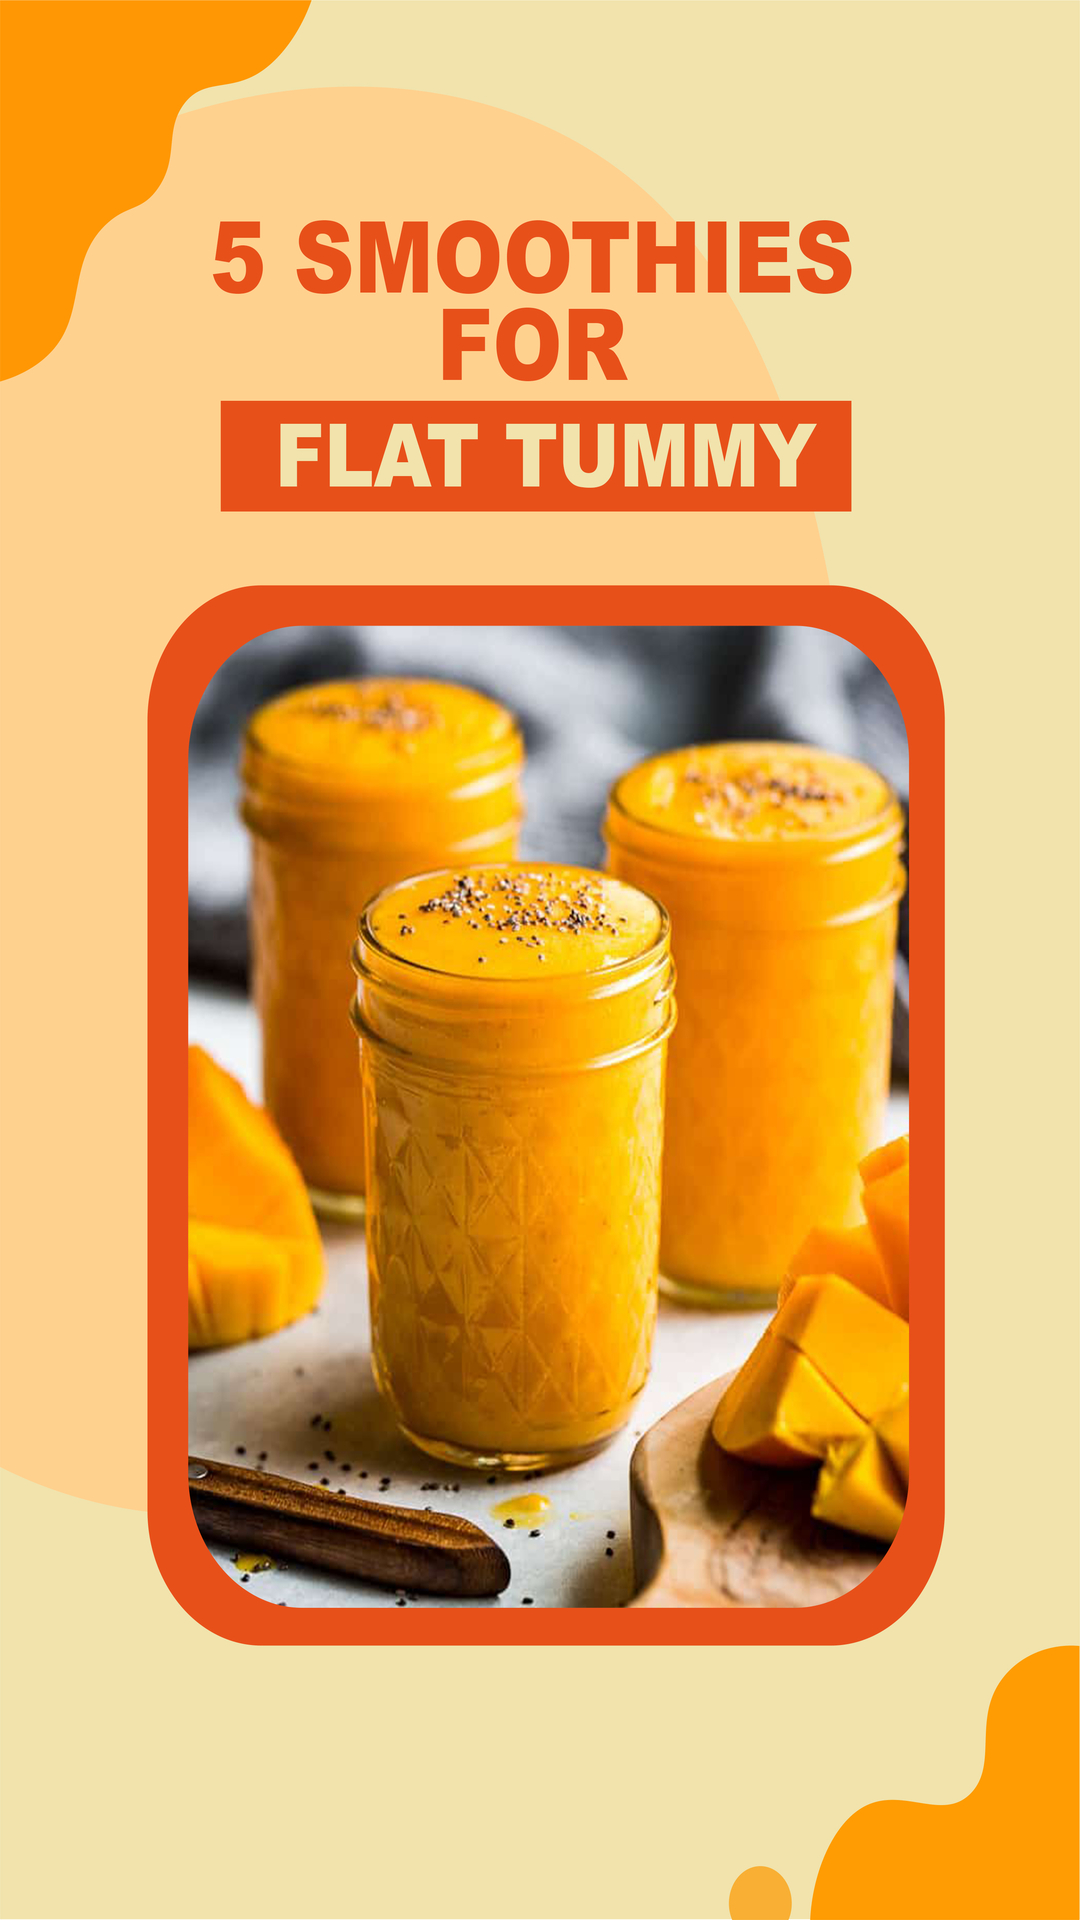 5 Smoothies for Flat Tummy